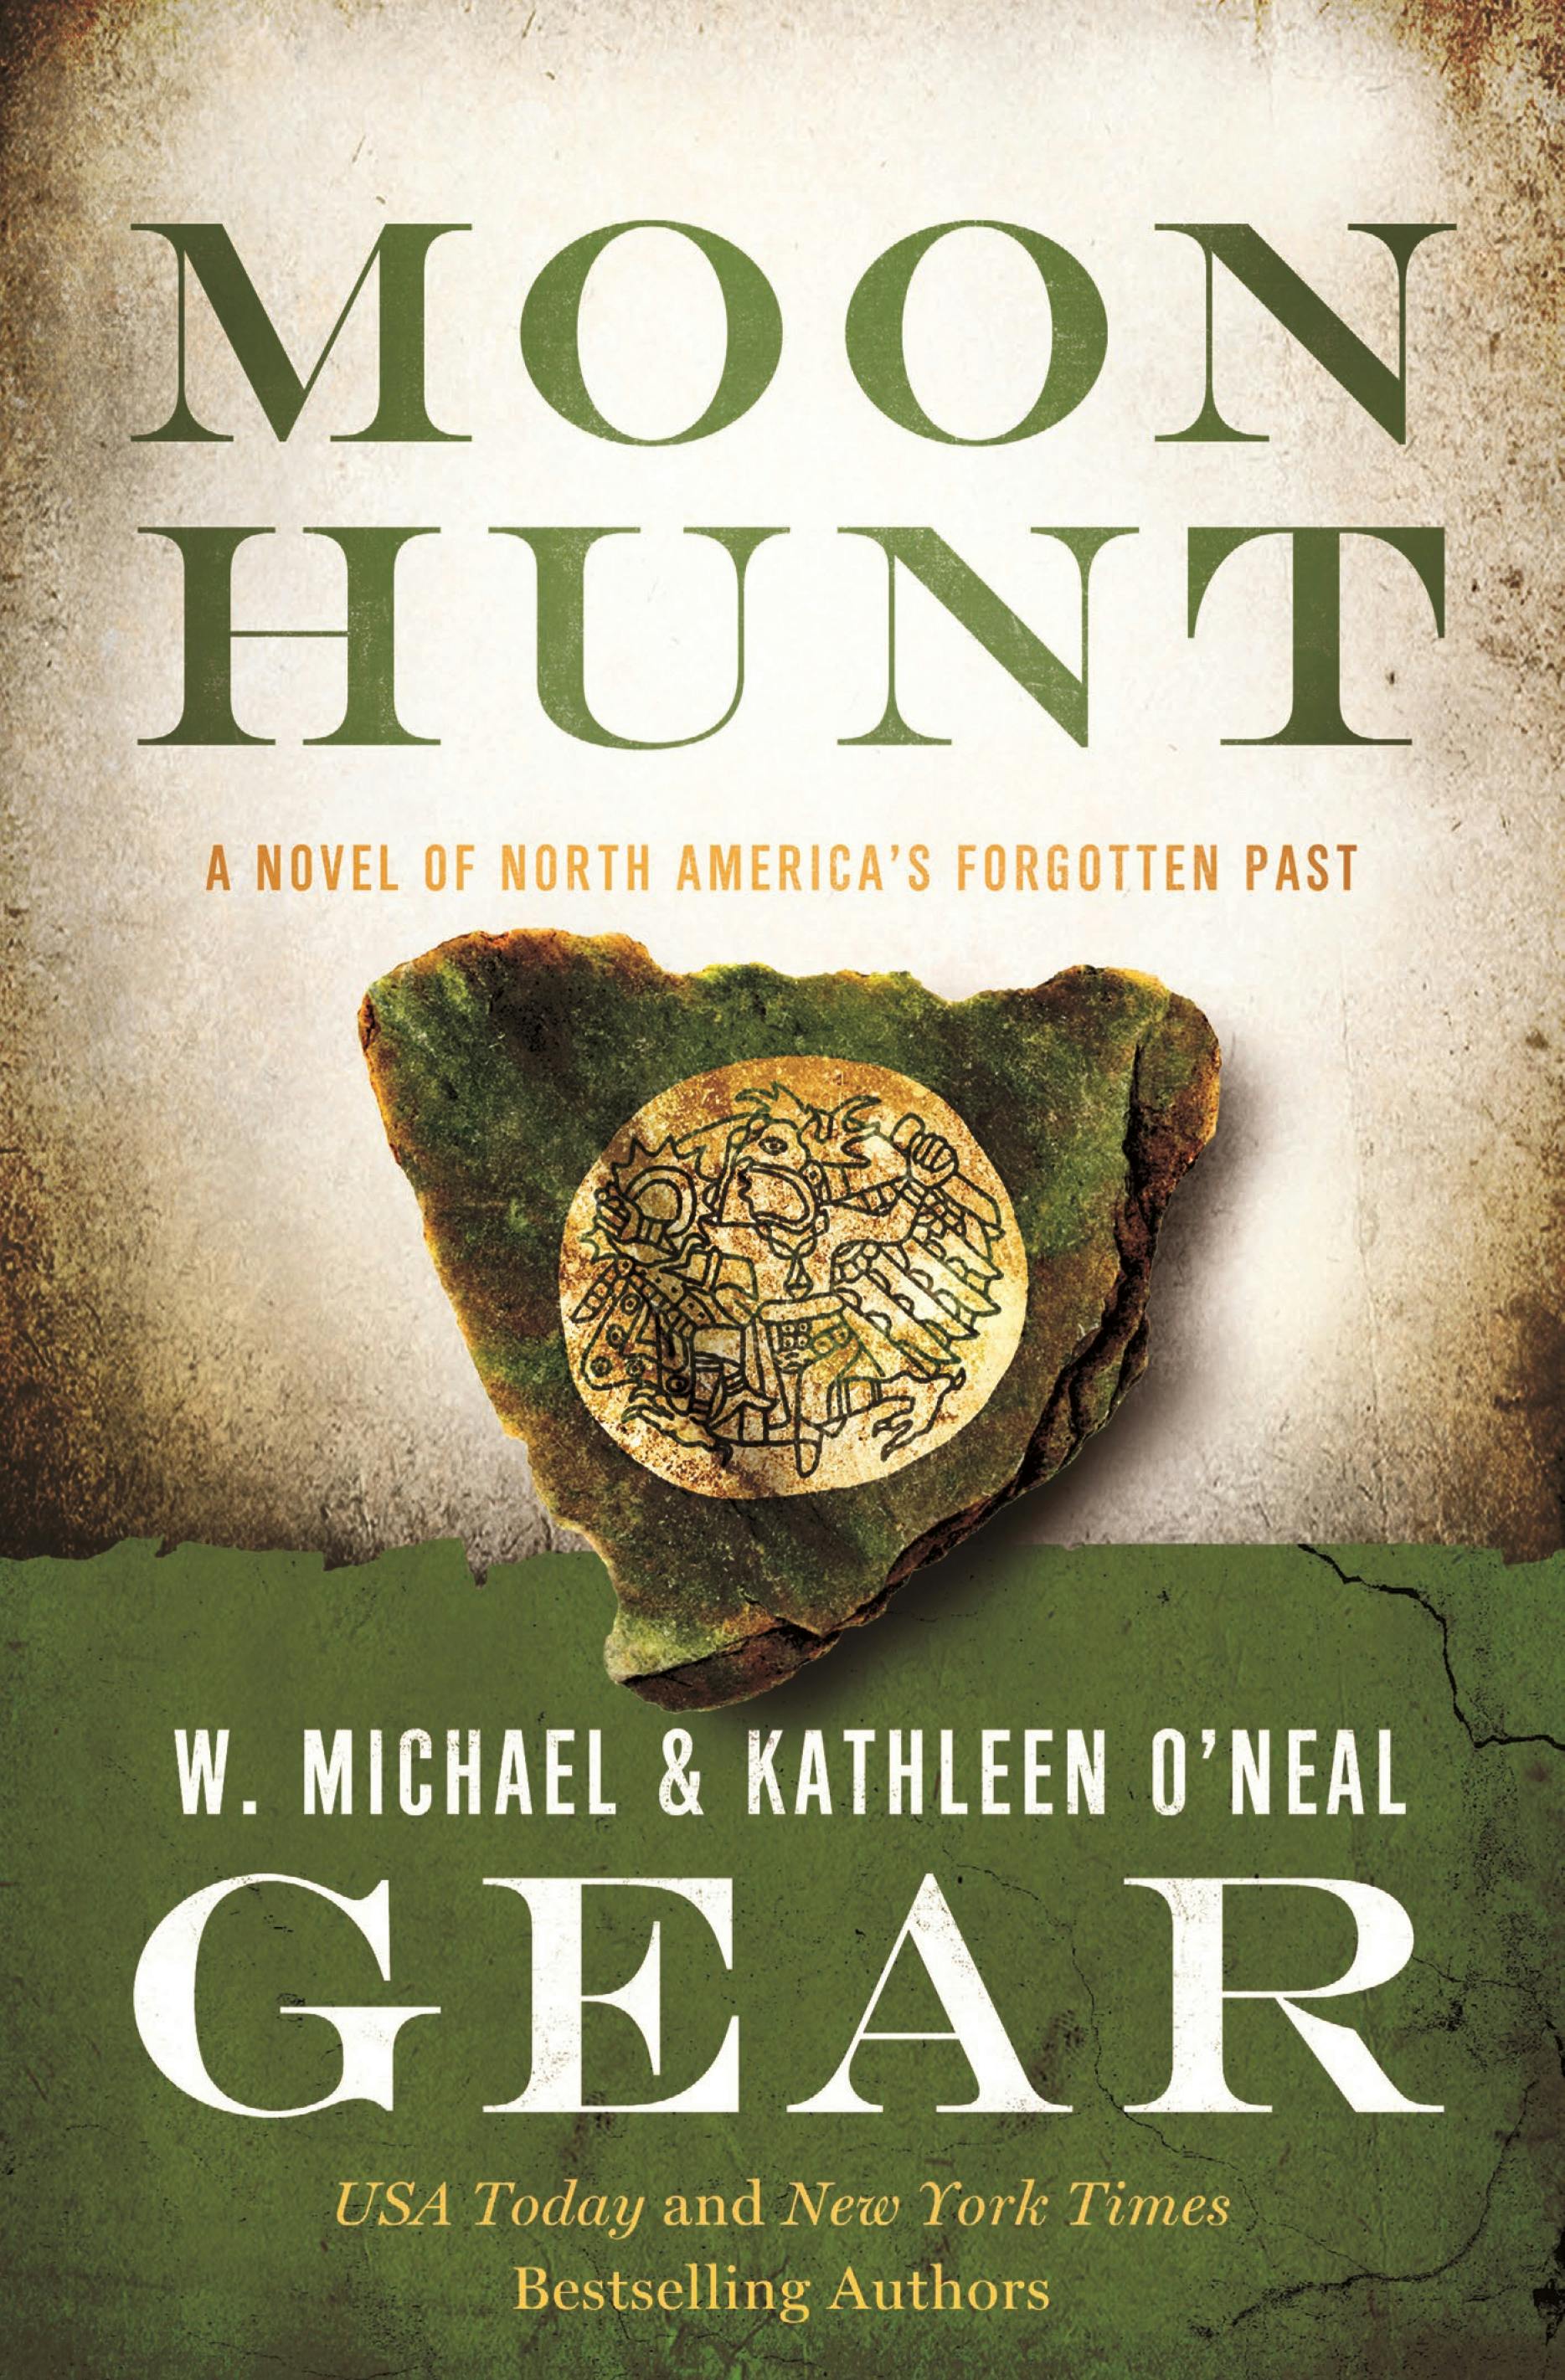 Cover for the book titled as: Moon Hunt